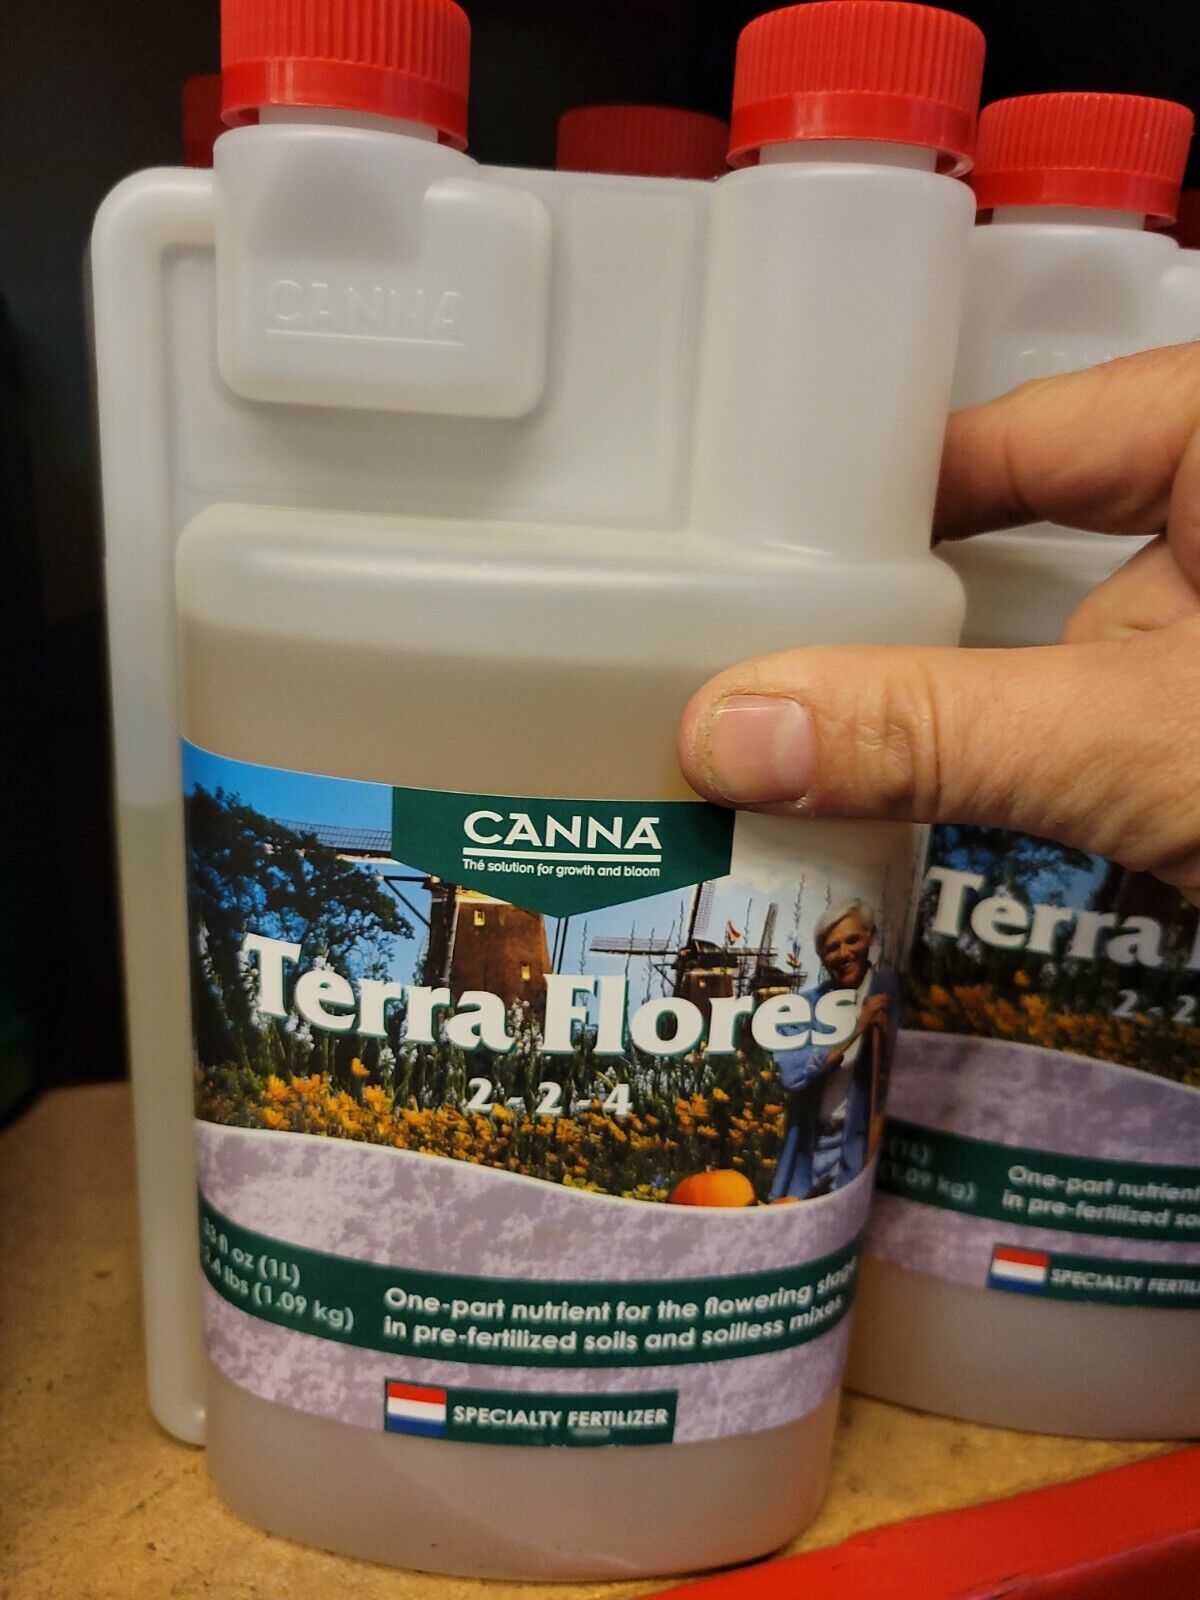 Canna nutrients Terra Flores 1 L one part Nutrient for the flowering stage soils